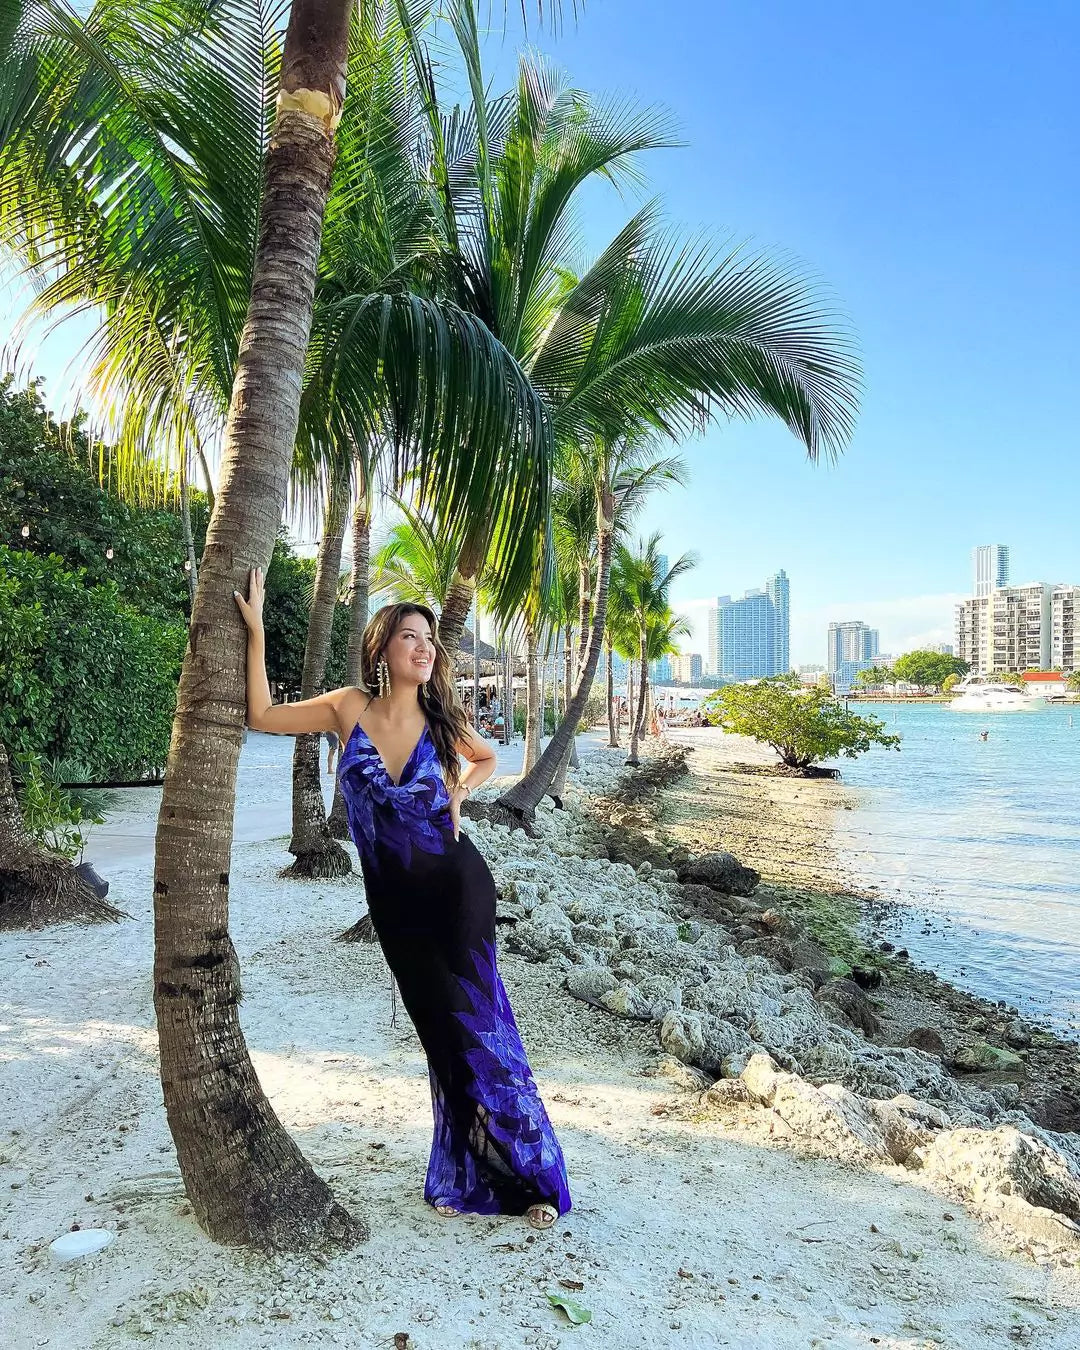 A woman in a purple dress leans on a palm tree